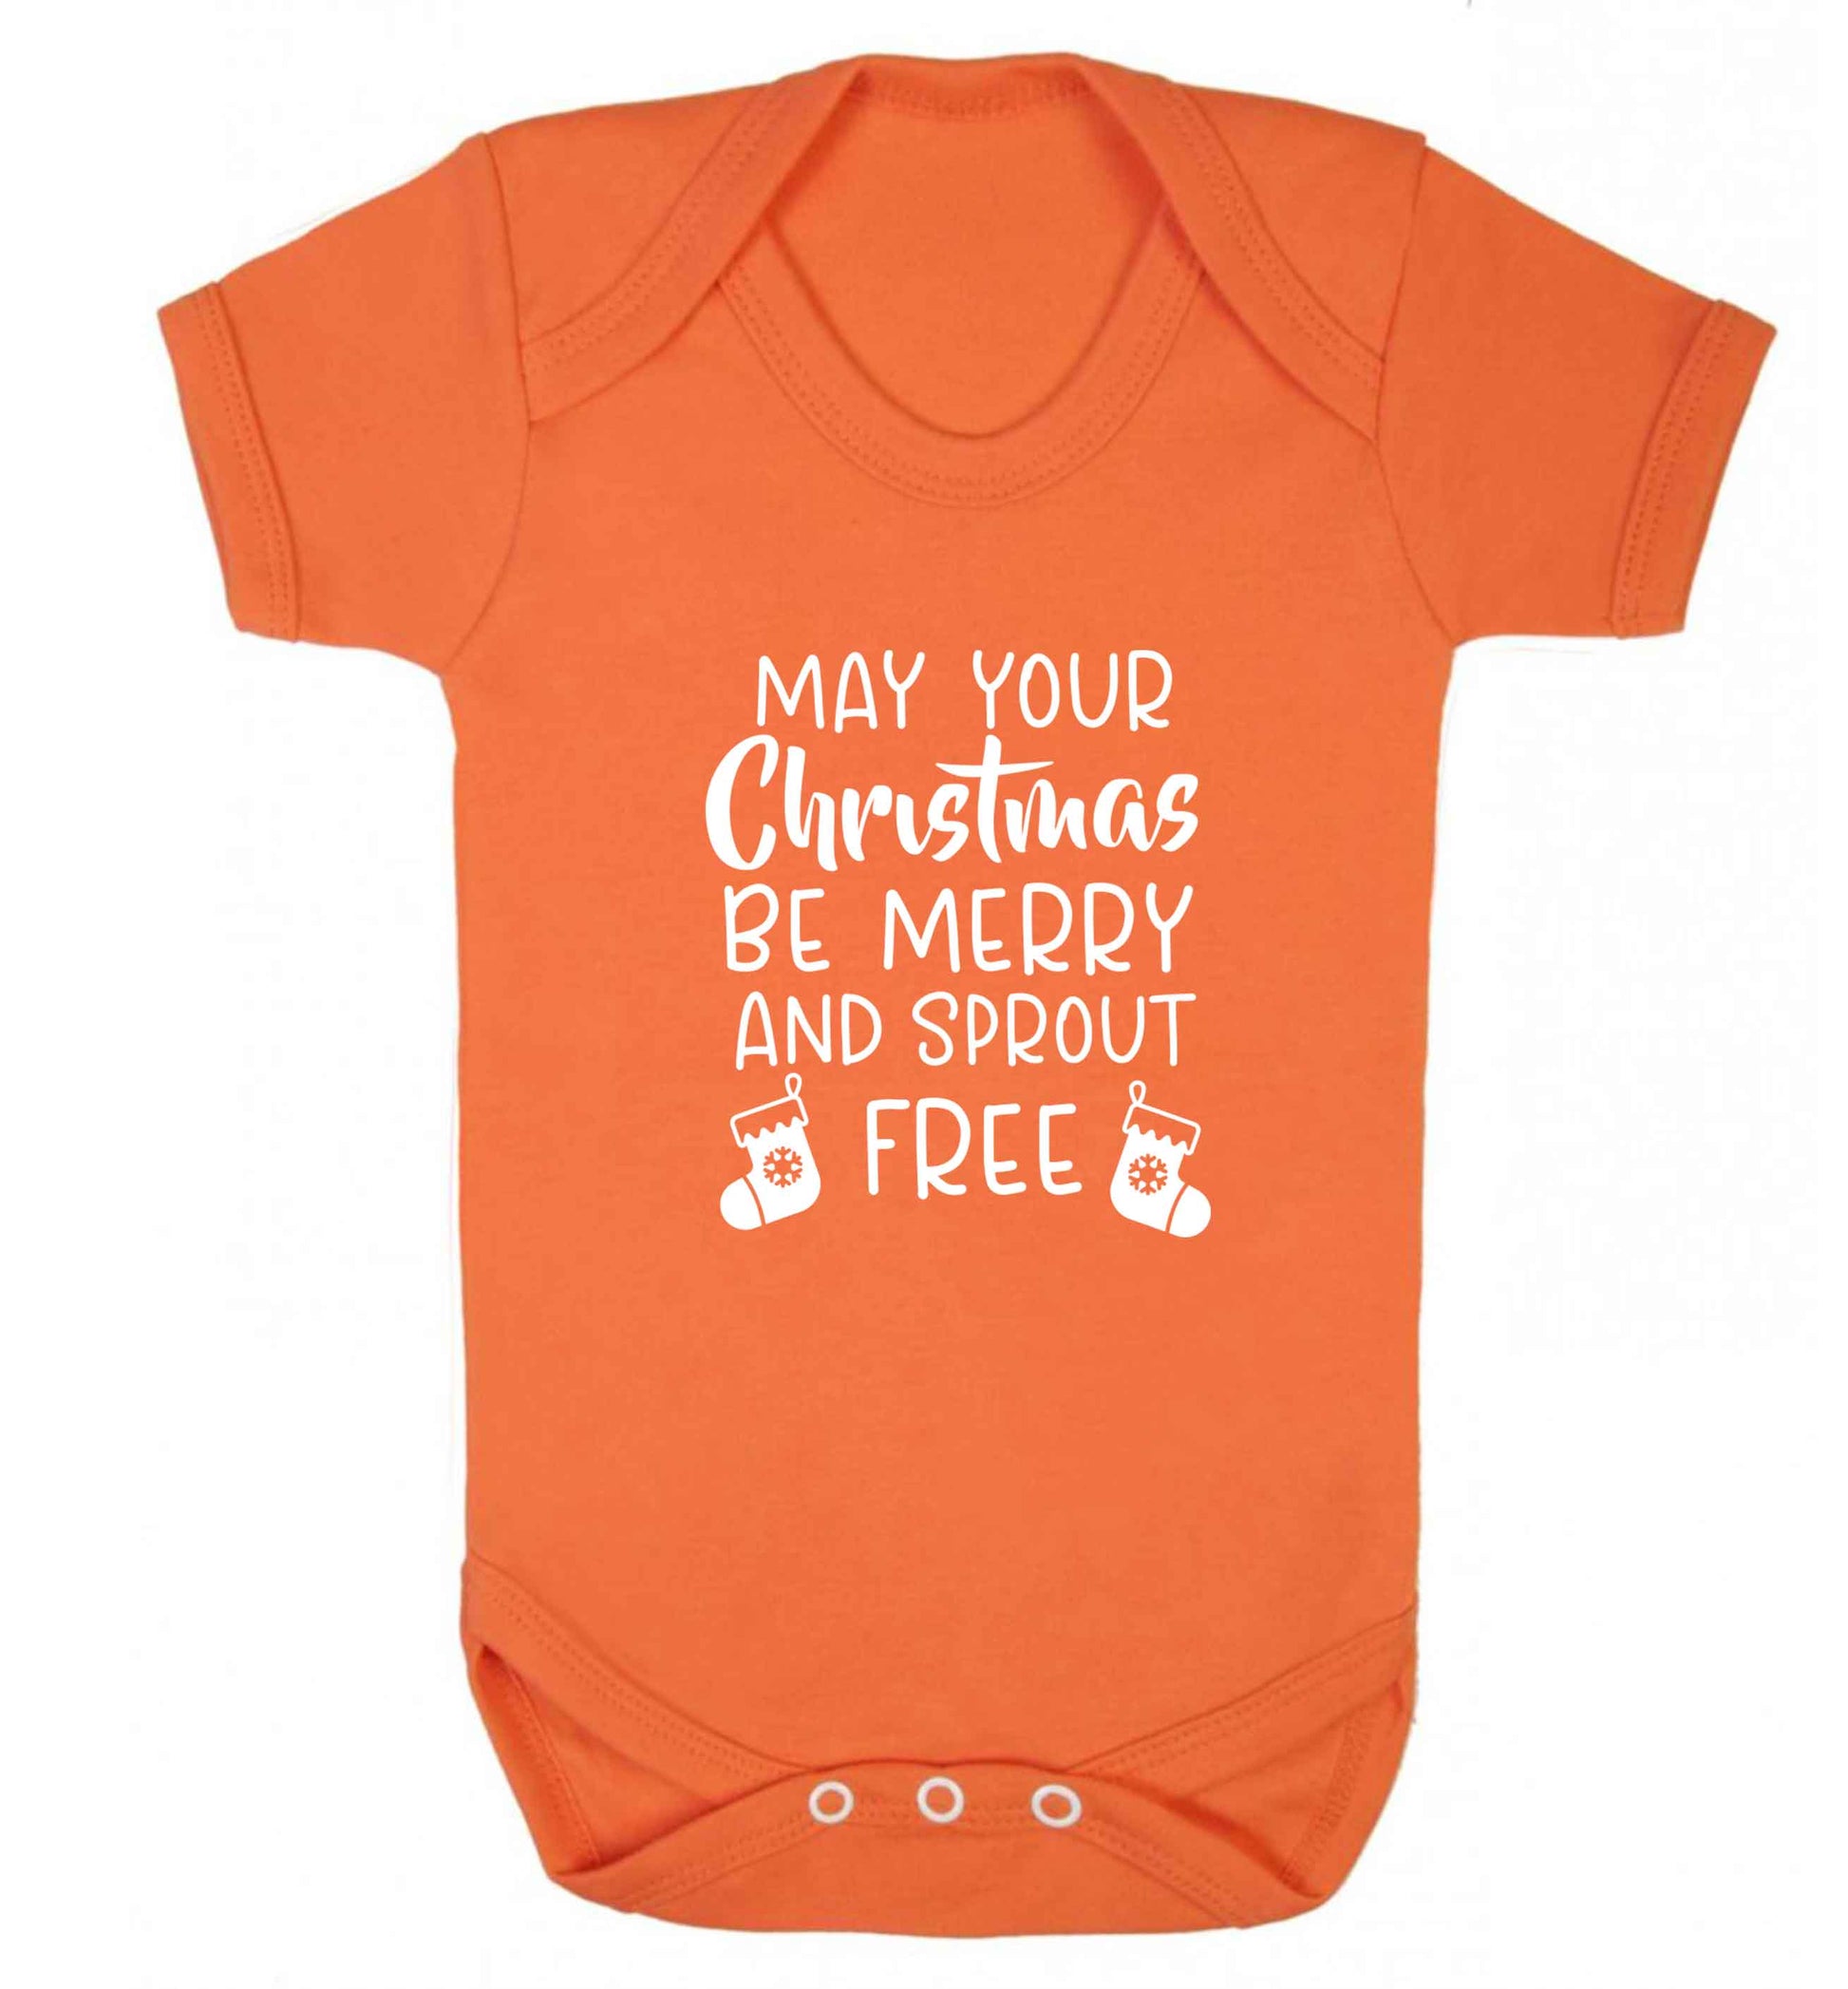 May your Christmas be merry and sprout free baby vest orange 18-24 months